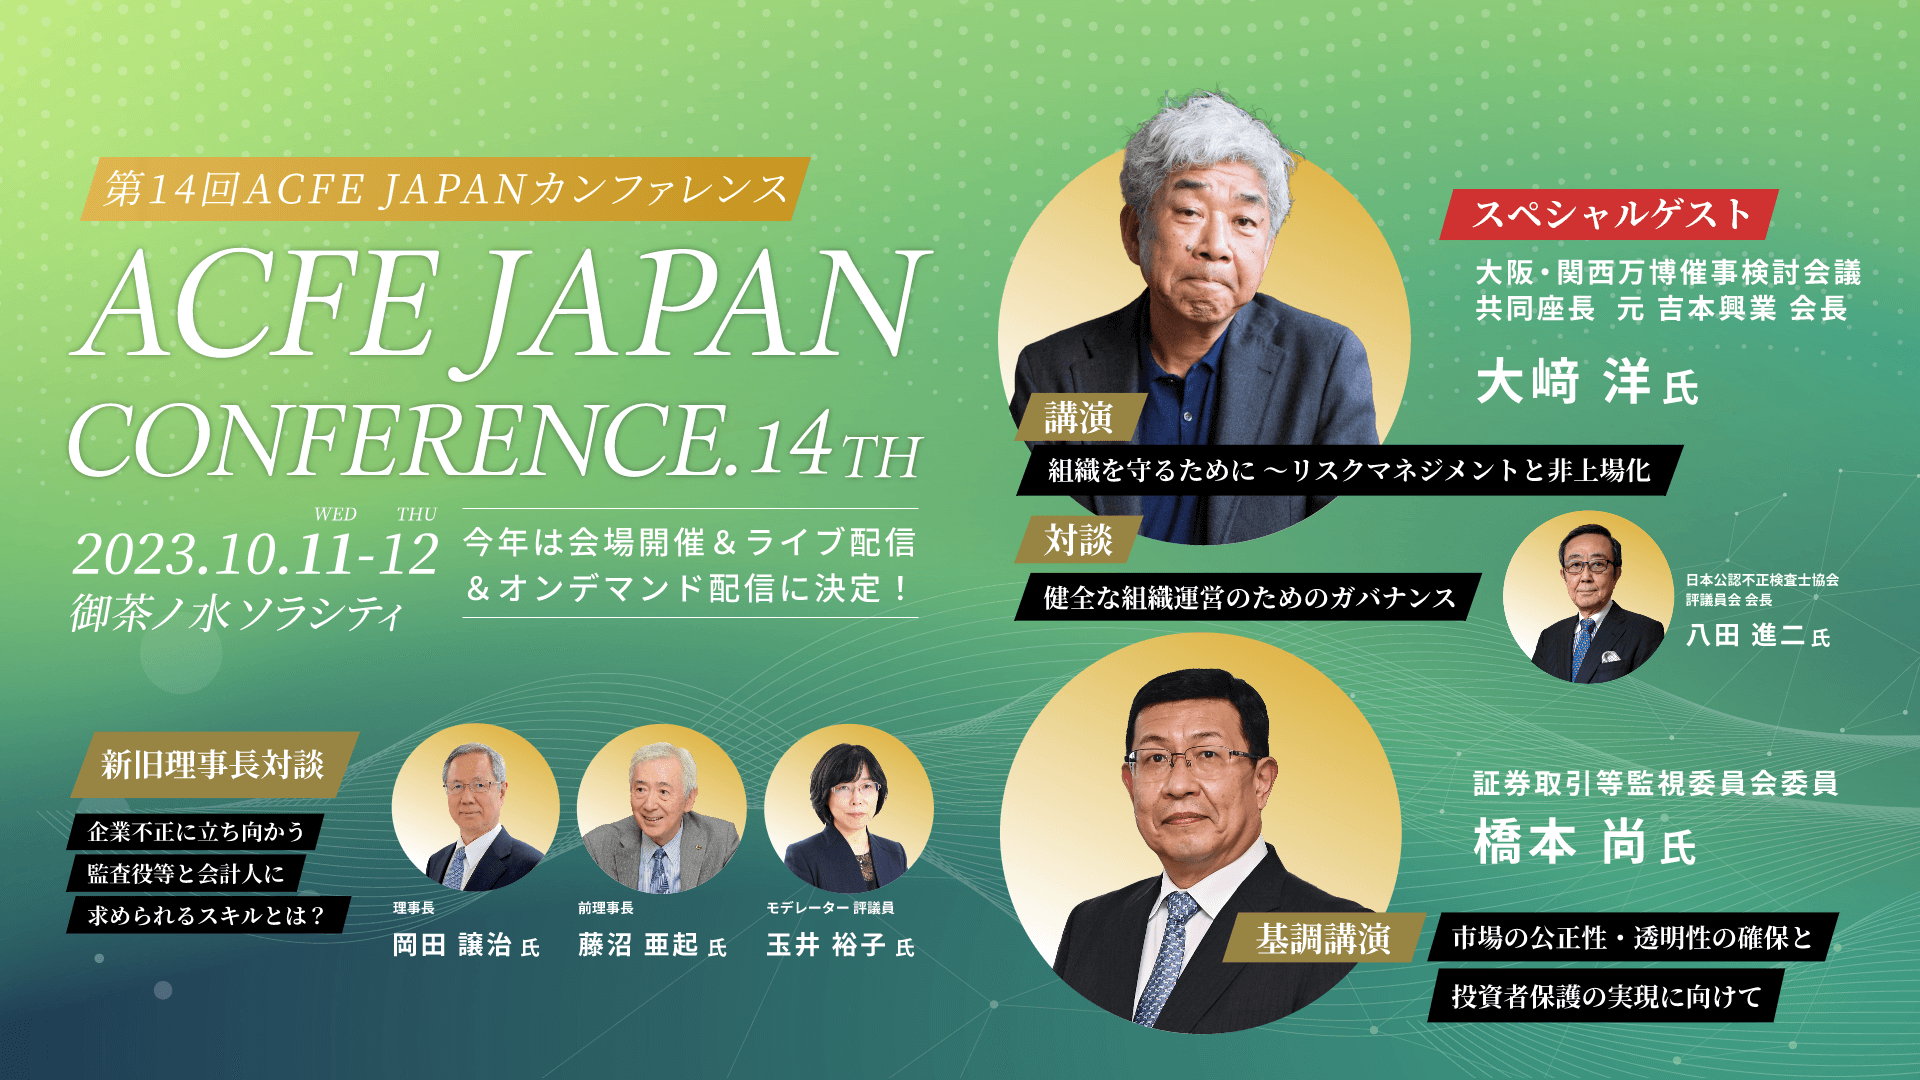 ACFE JAPAN CONFERENCE 14TH